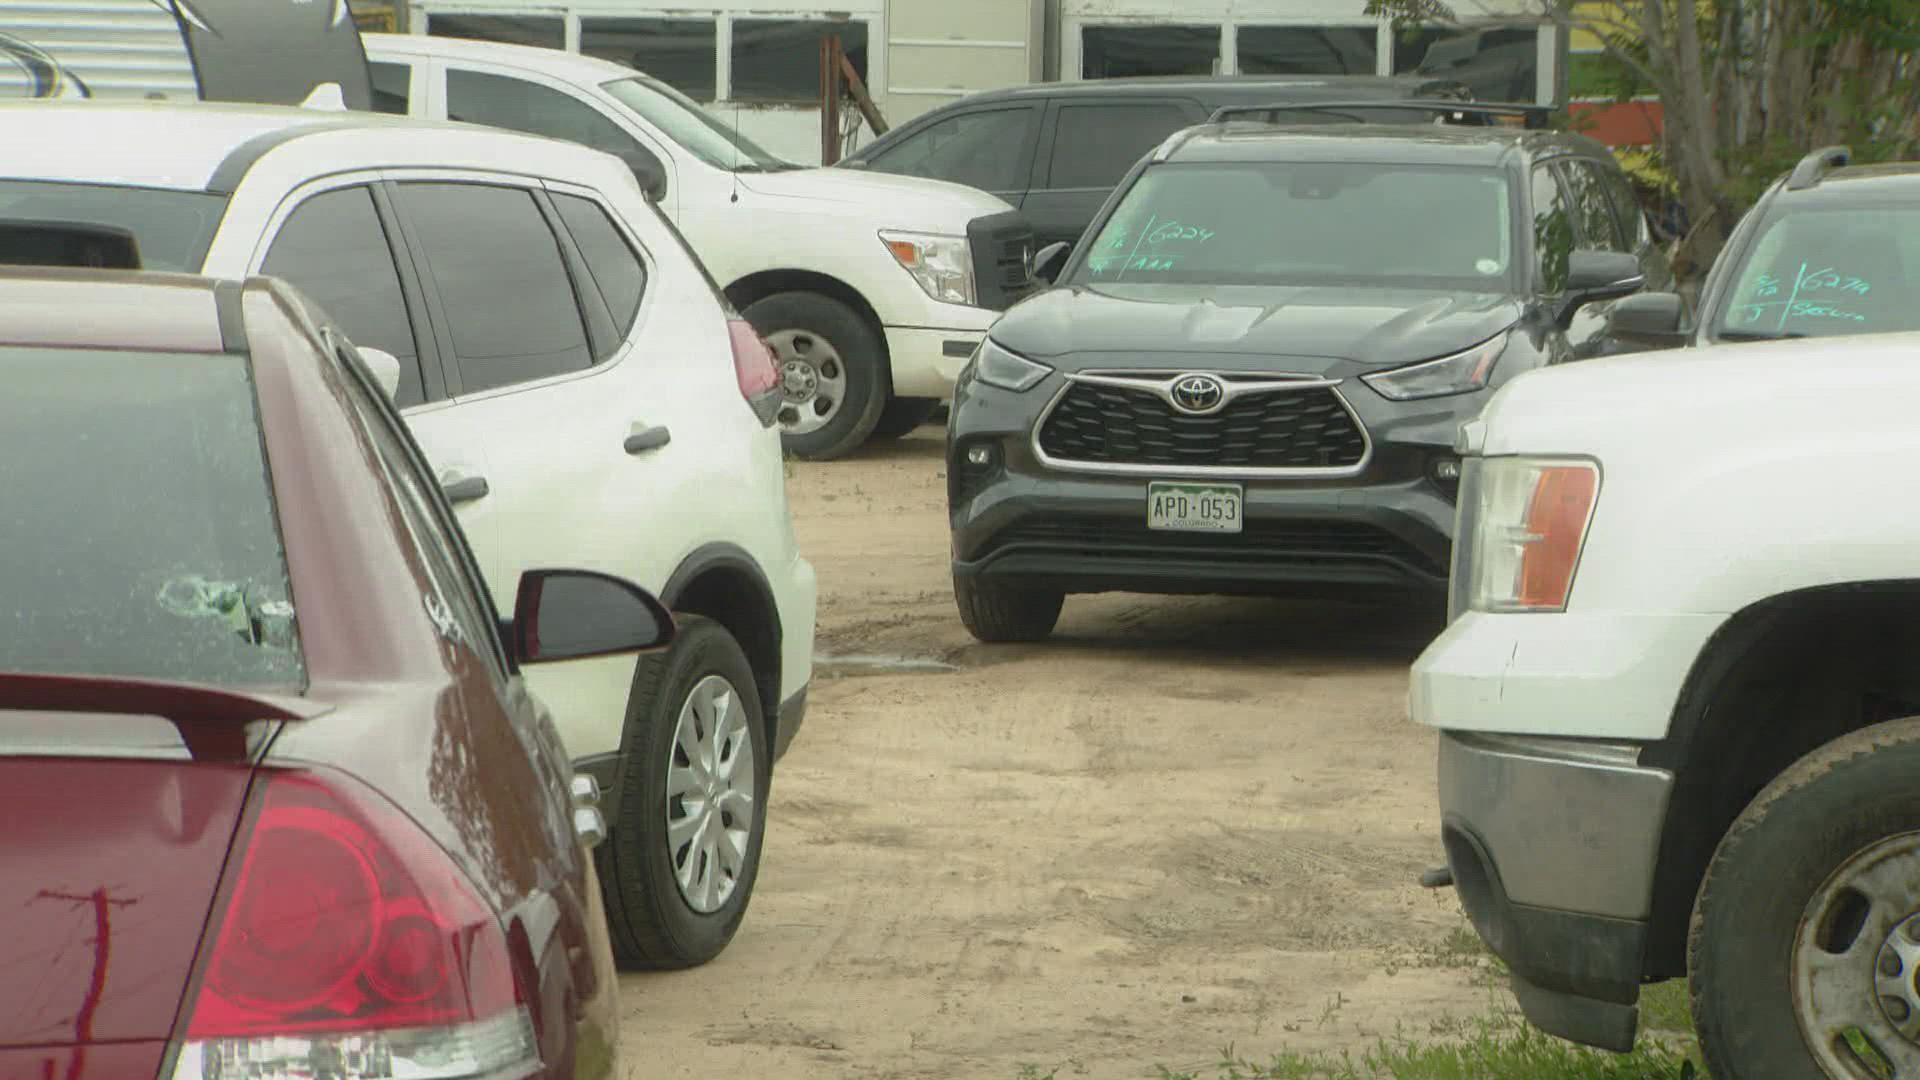 More than 21,000 cars have been reported stolen in Colorado since January, according to data from the Colorado Metropolitan Auto Theft Task Force.